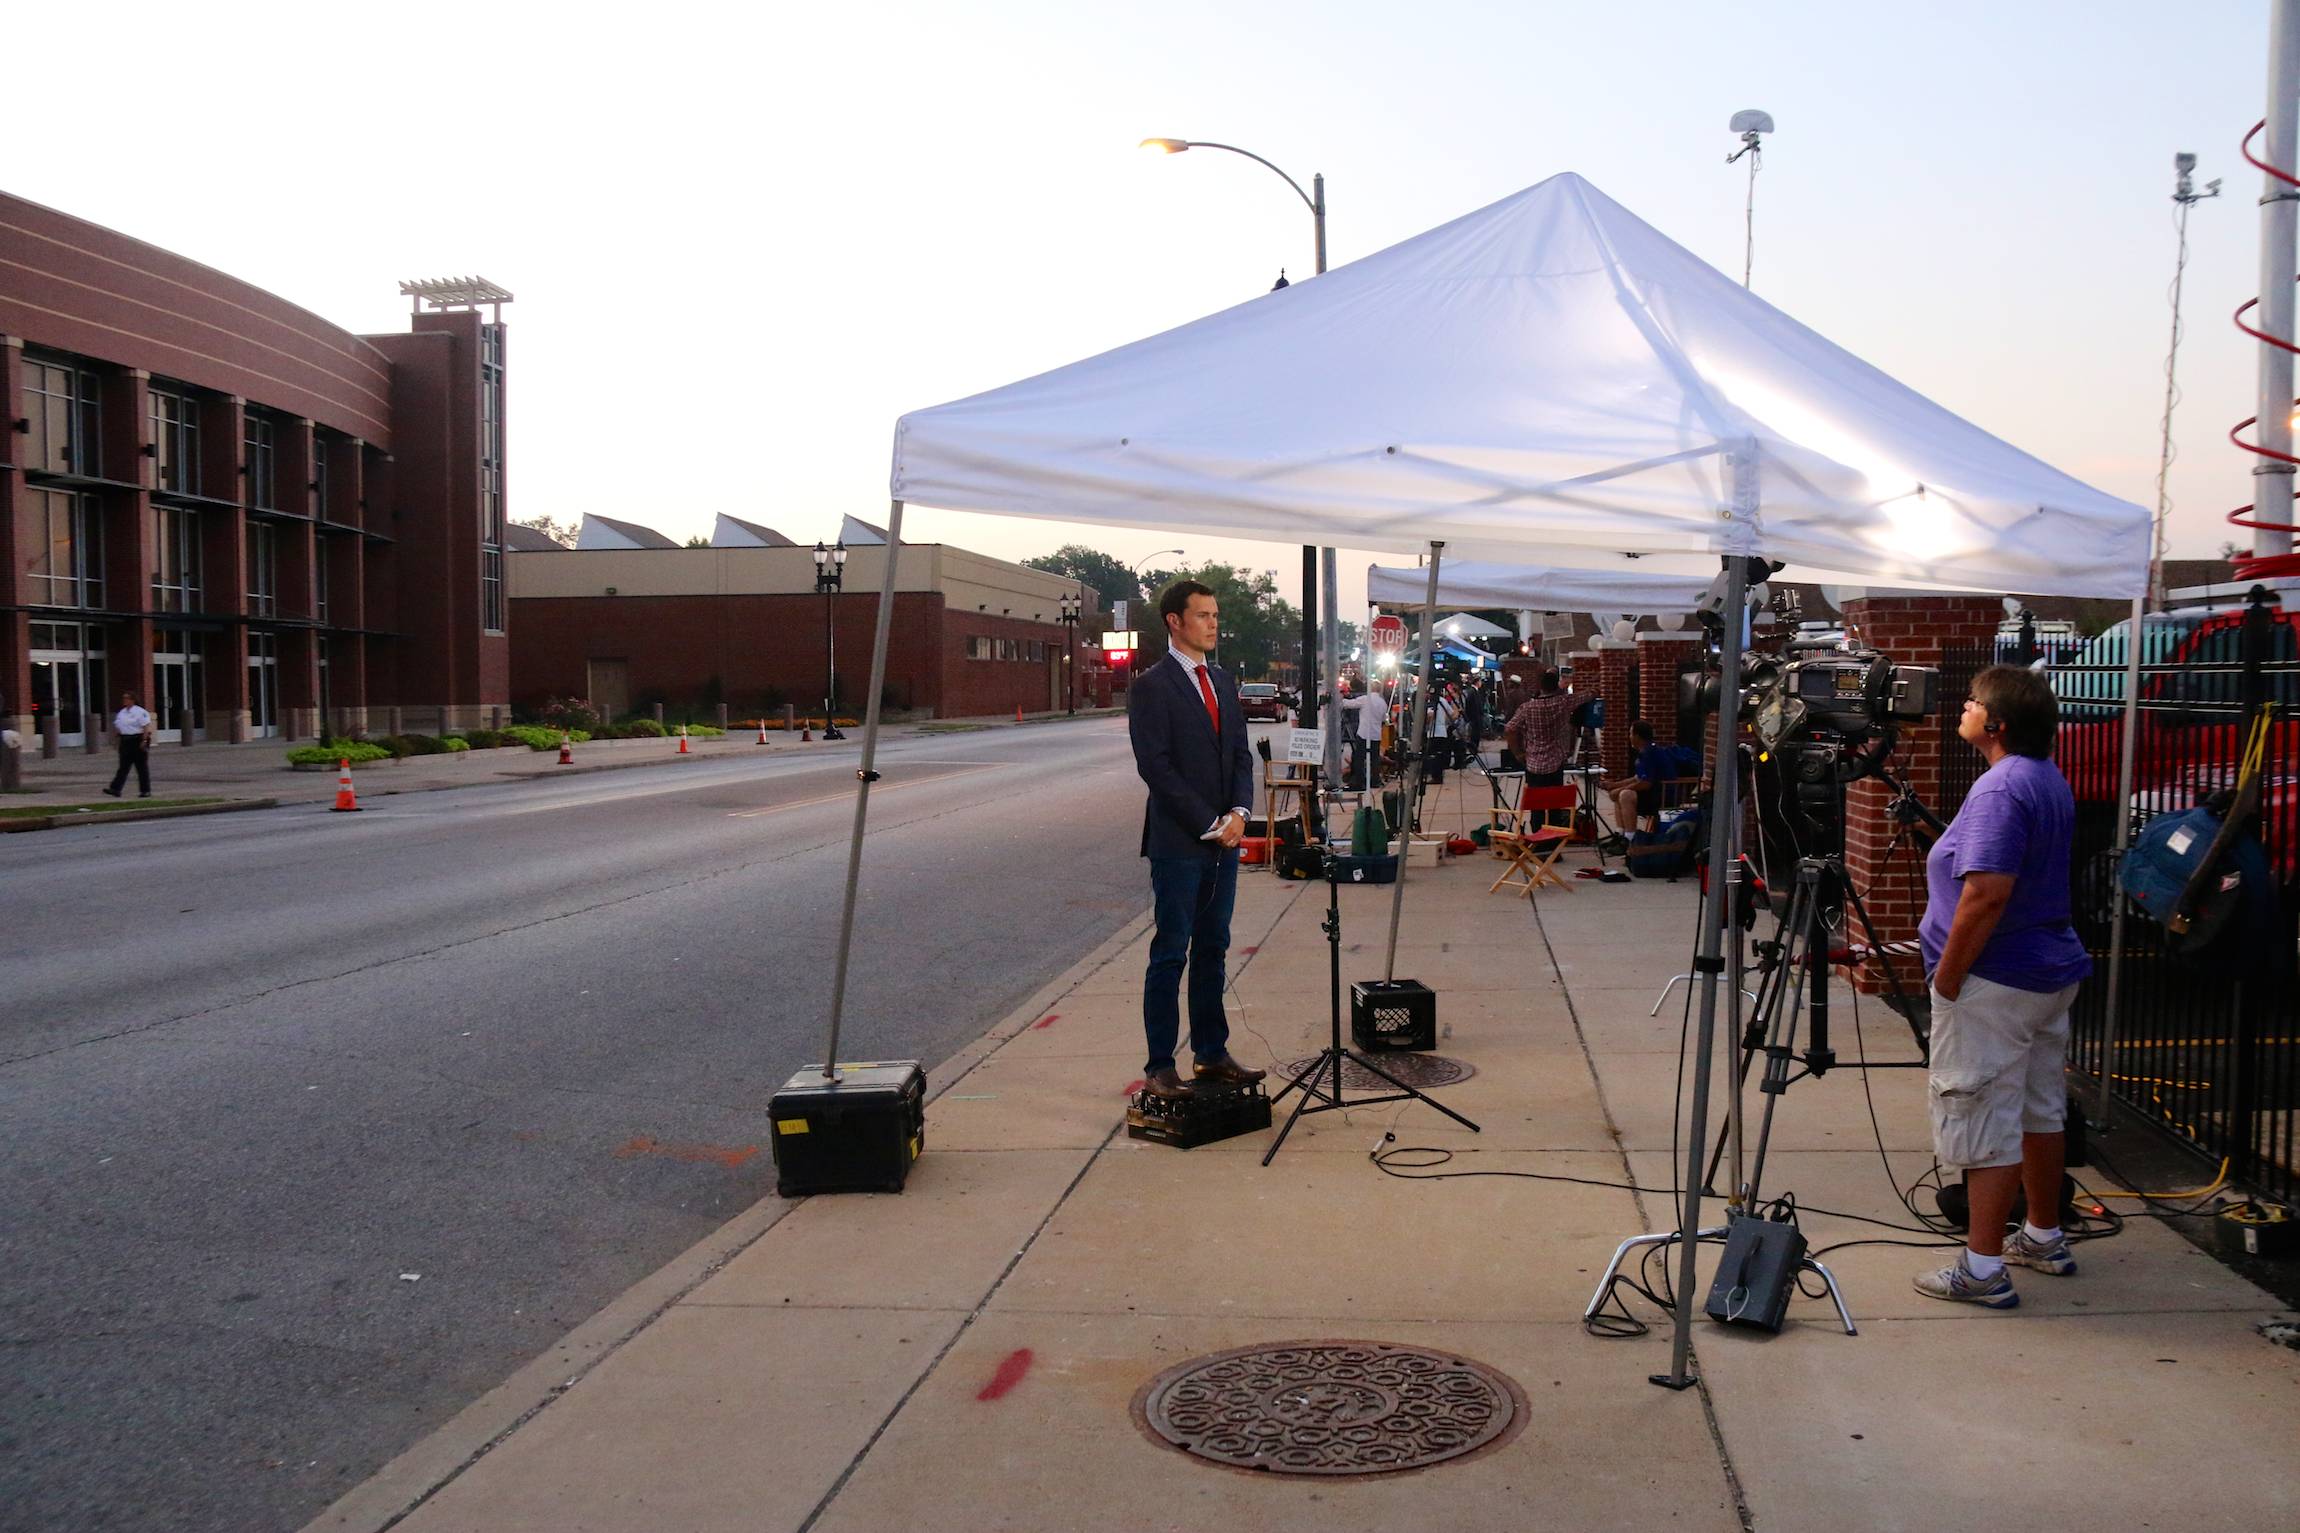 A reporter stands on a box for a live stand-up in front of the Friendly Temple Baptist church in St. Louis ahead of the funeral service for Michael Brown, Monday, August 25, 2014. (Yann Schreiber, File)